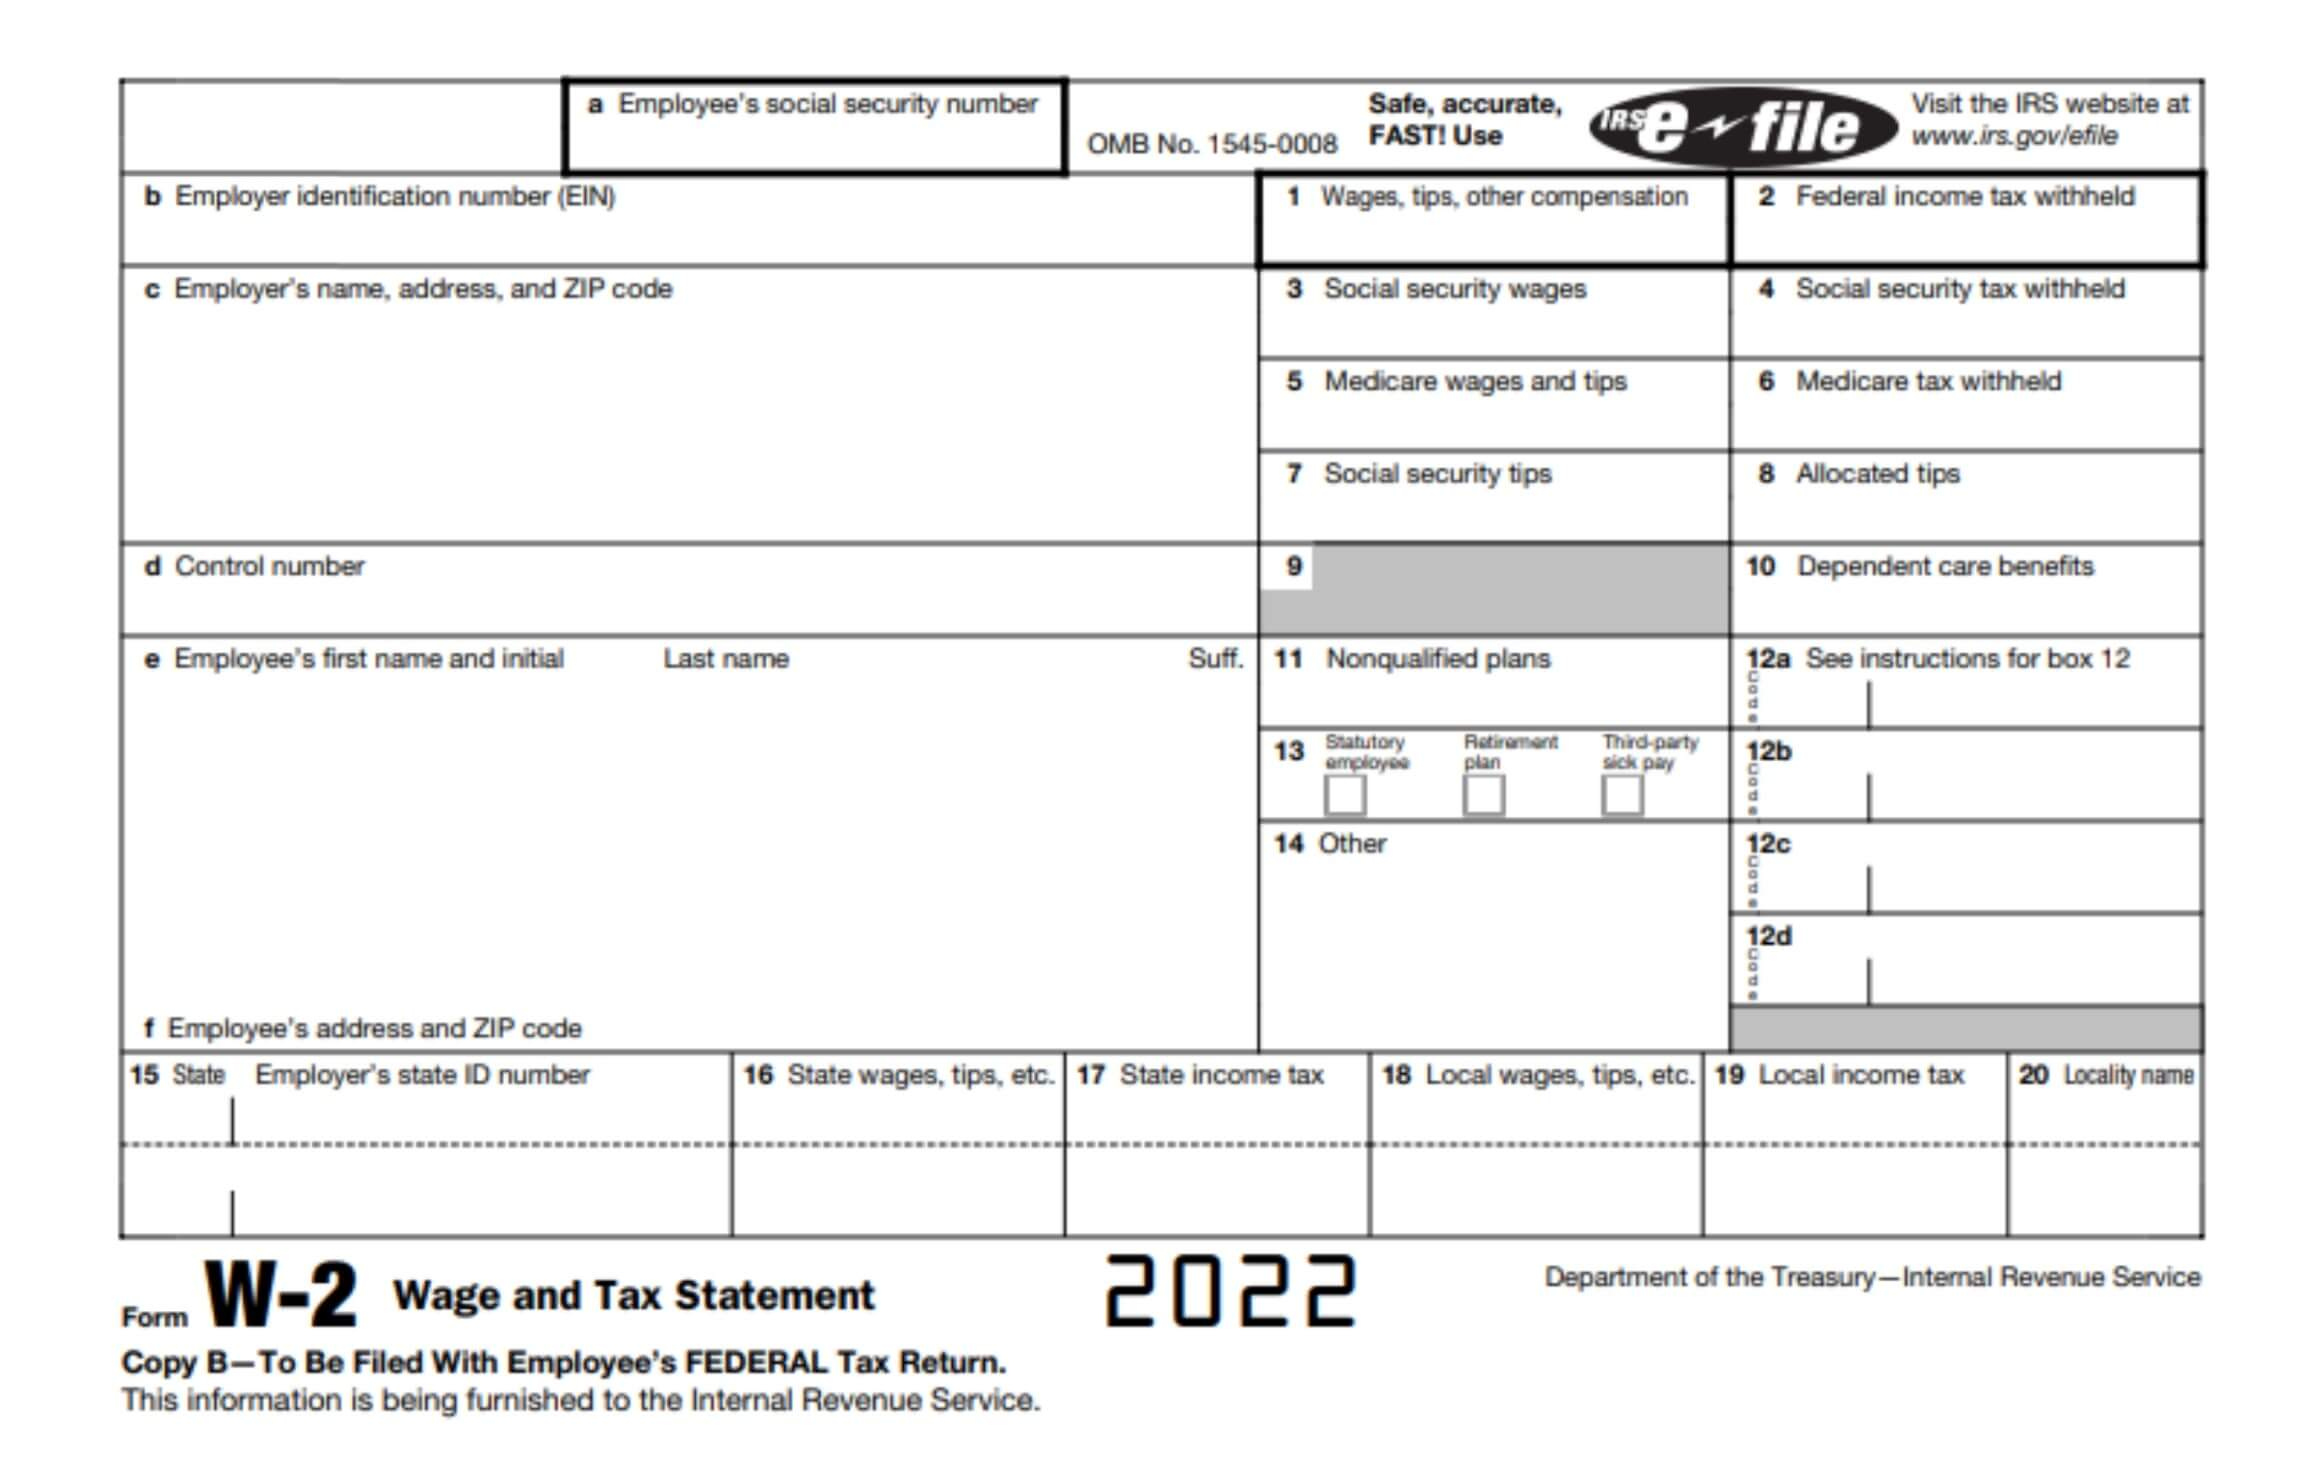 Understanding Your Irs Form W-2 intended for W2 Form Box 12